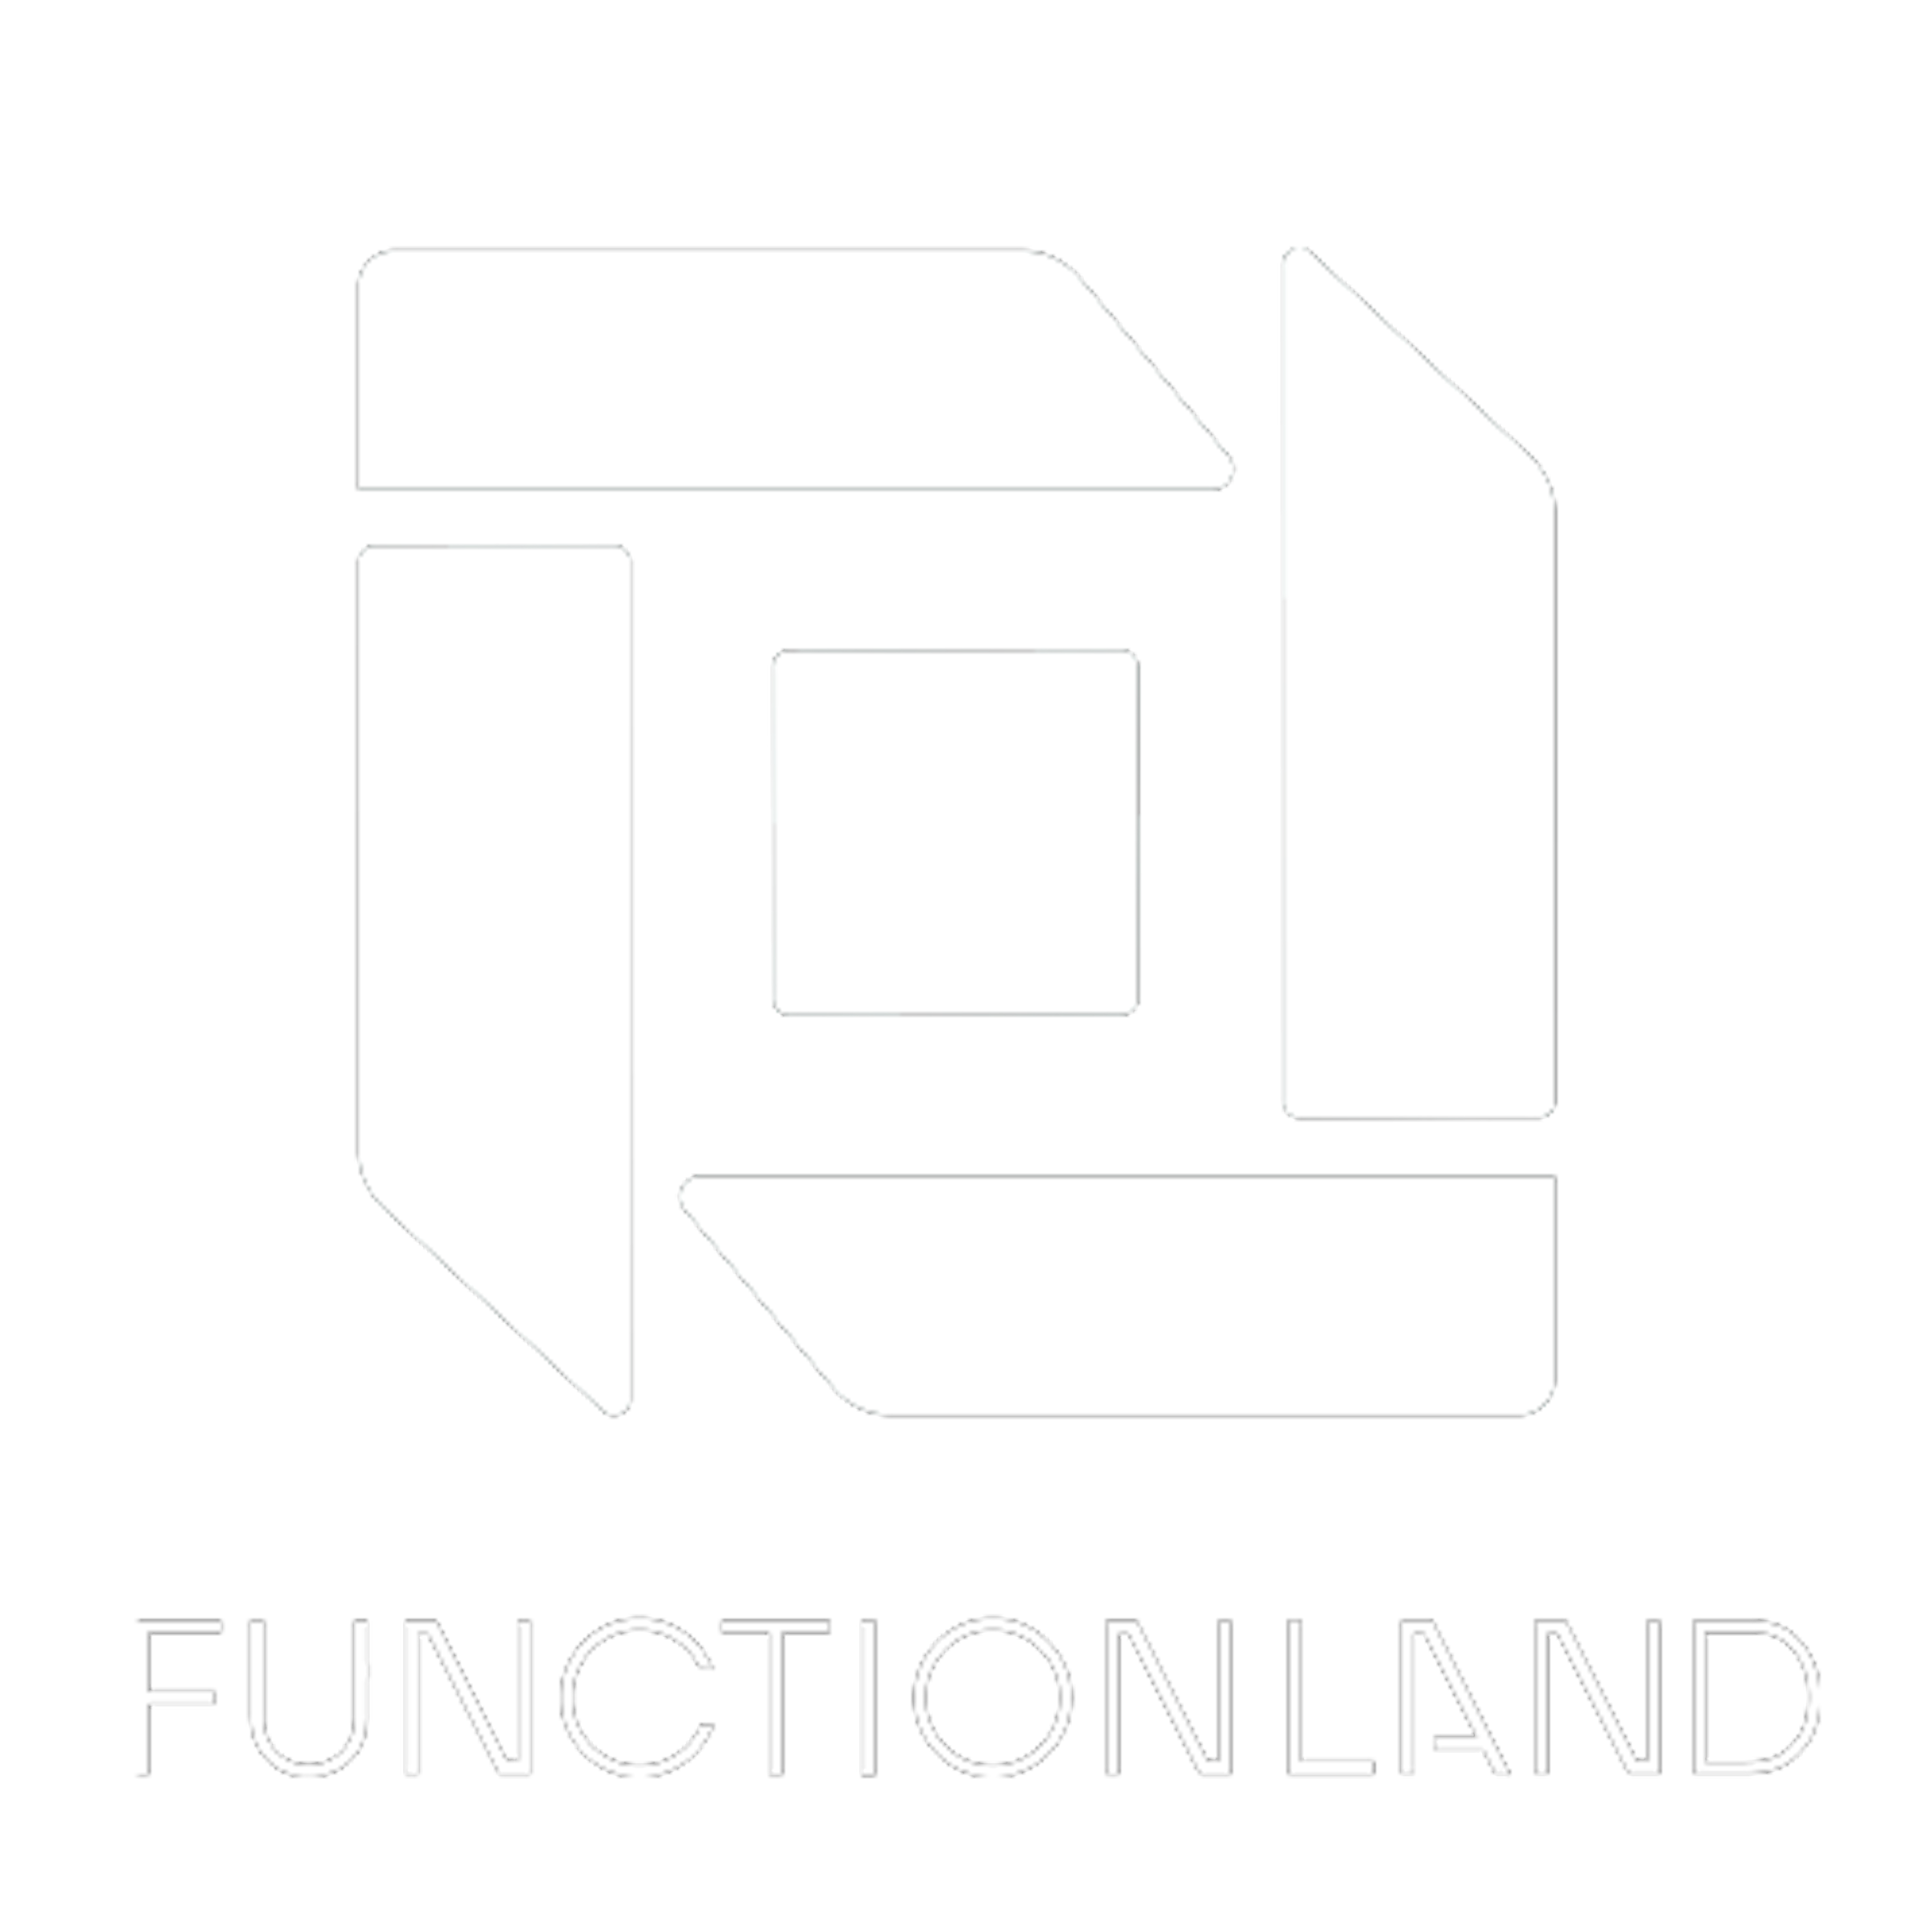 Functionland Logo: A Decentralized storage replacement for cloud